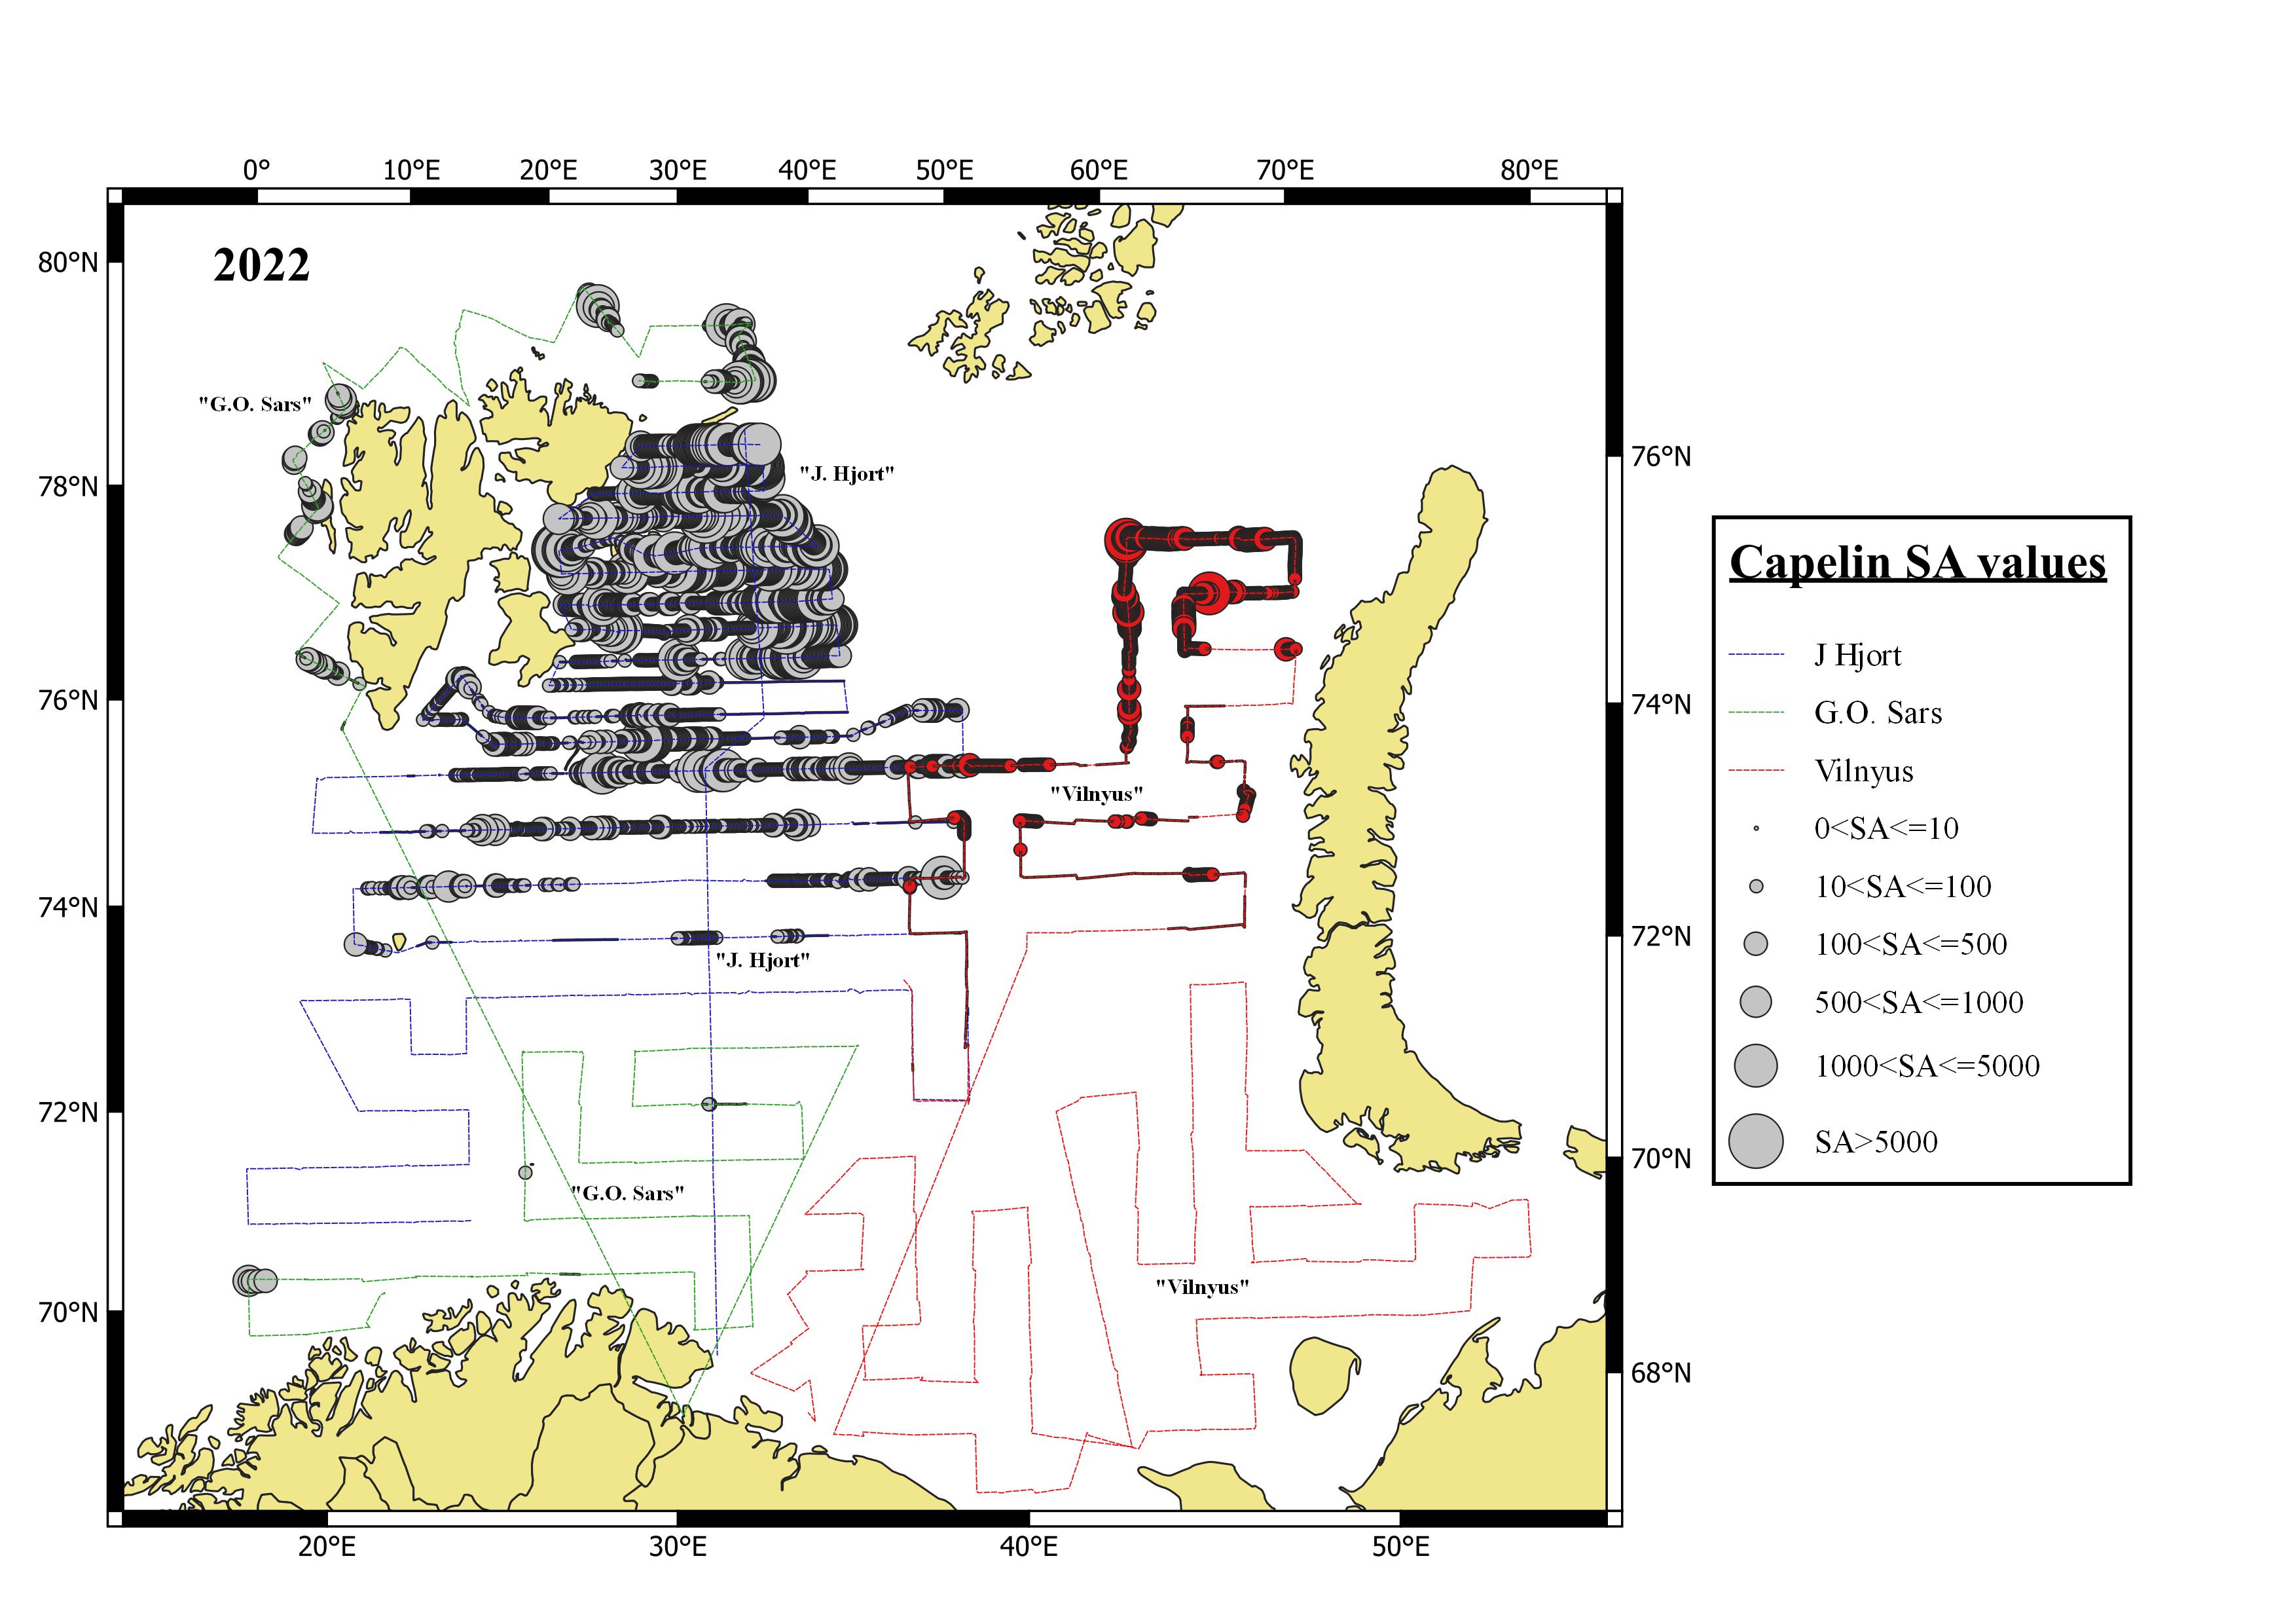 Ch 7.1.1.1 Geographical distribution of capelin 2022